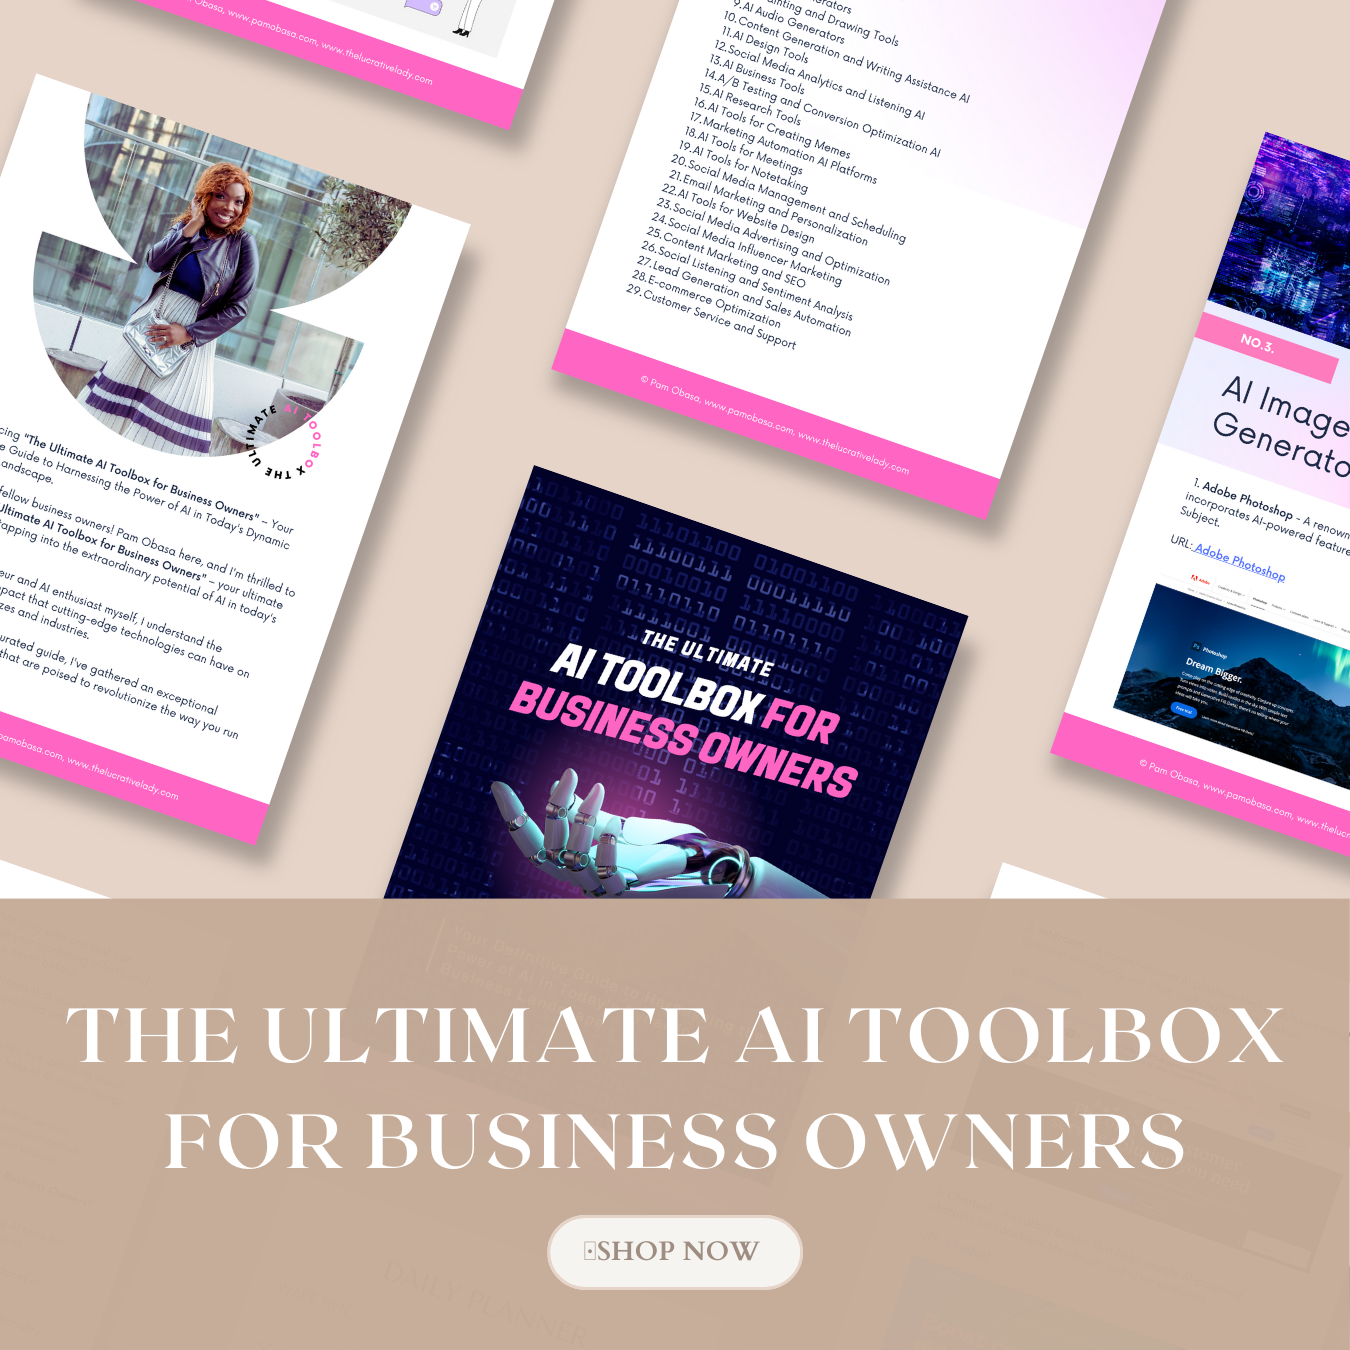 The Ultimate AI Toolbox for Business Owners